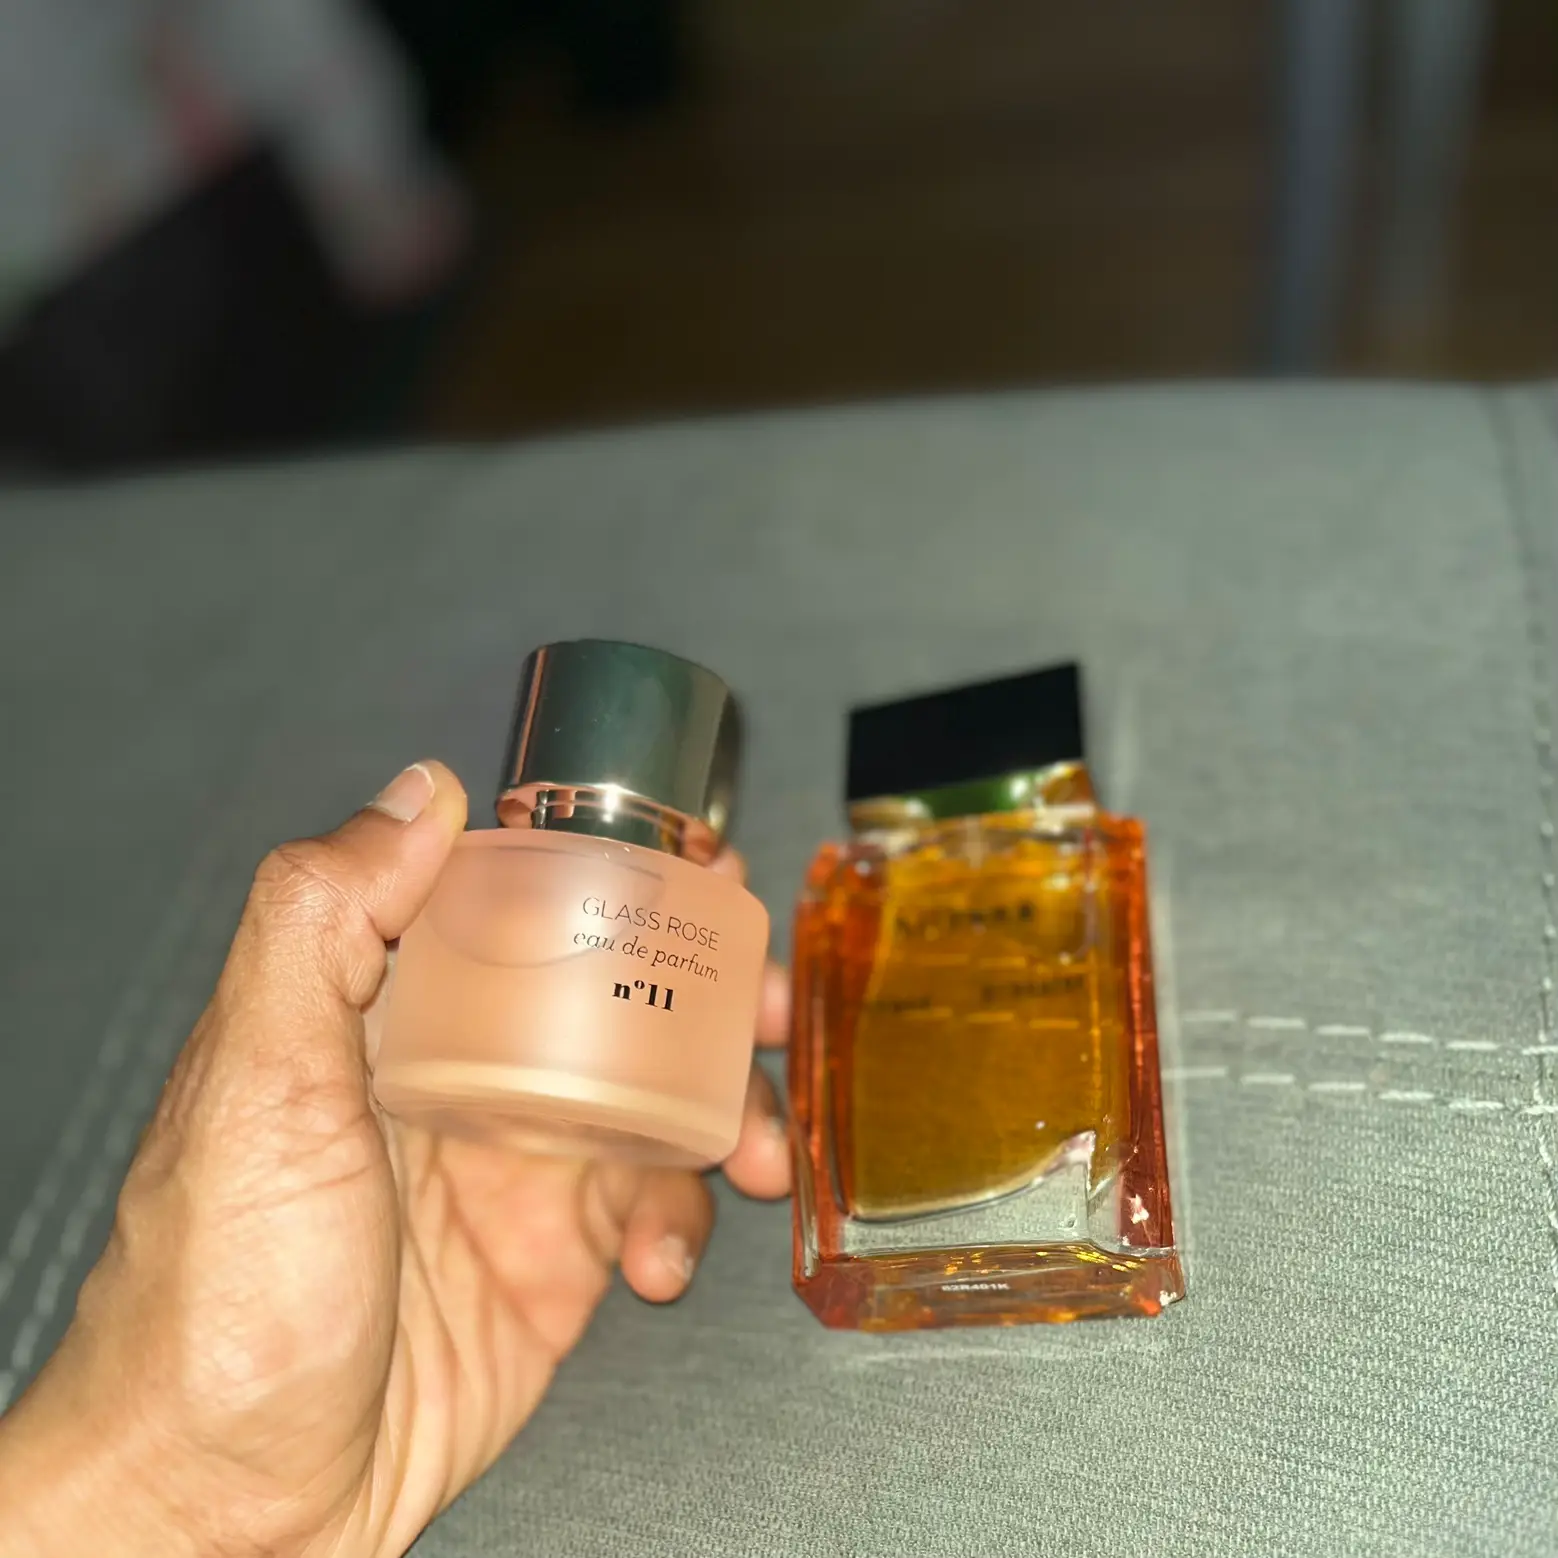 TJ MAXX PERFUME PICK UP, Gallery posted by Adura 🌻